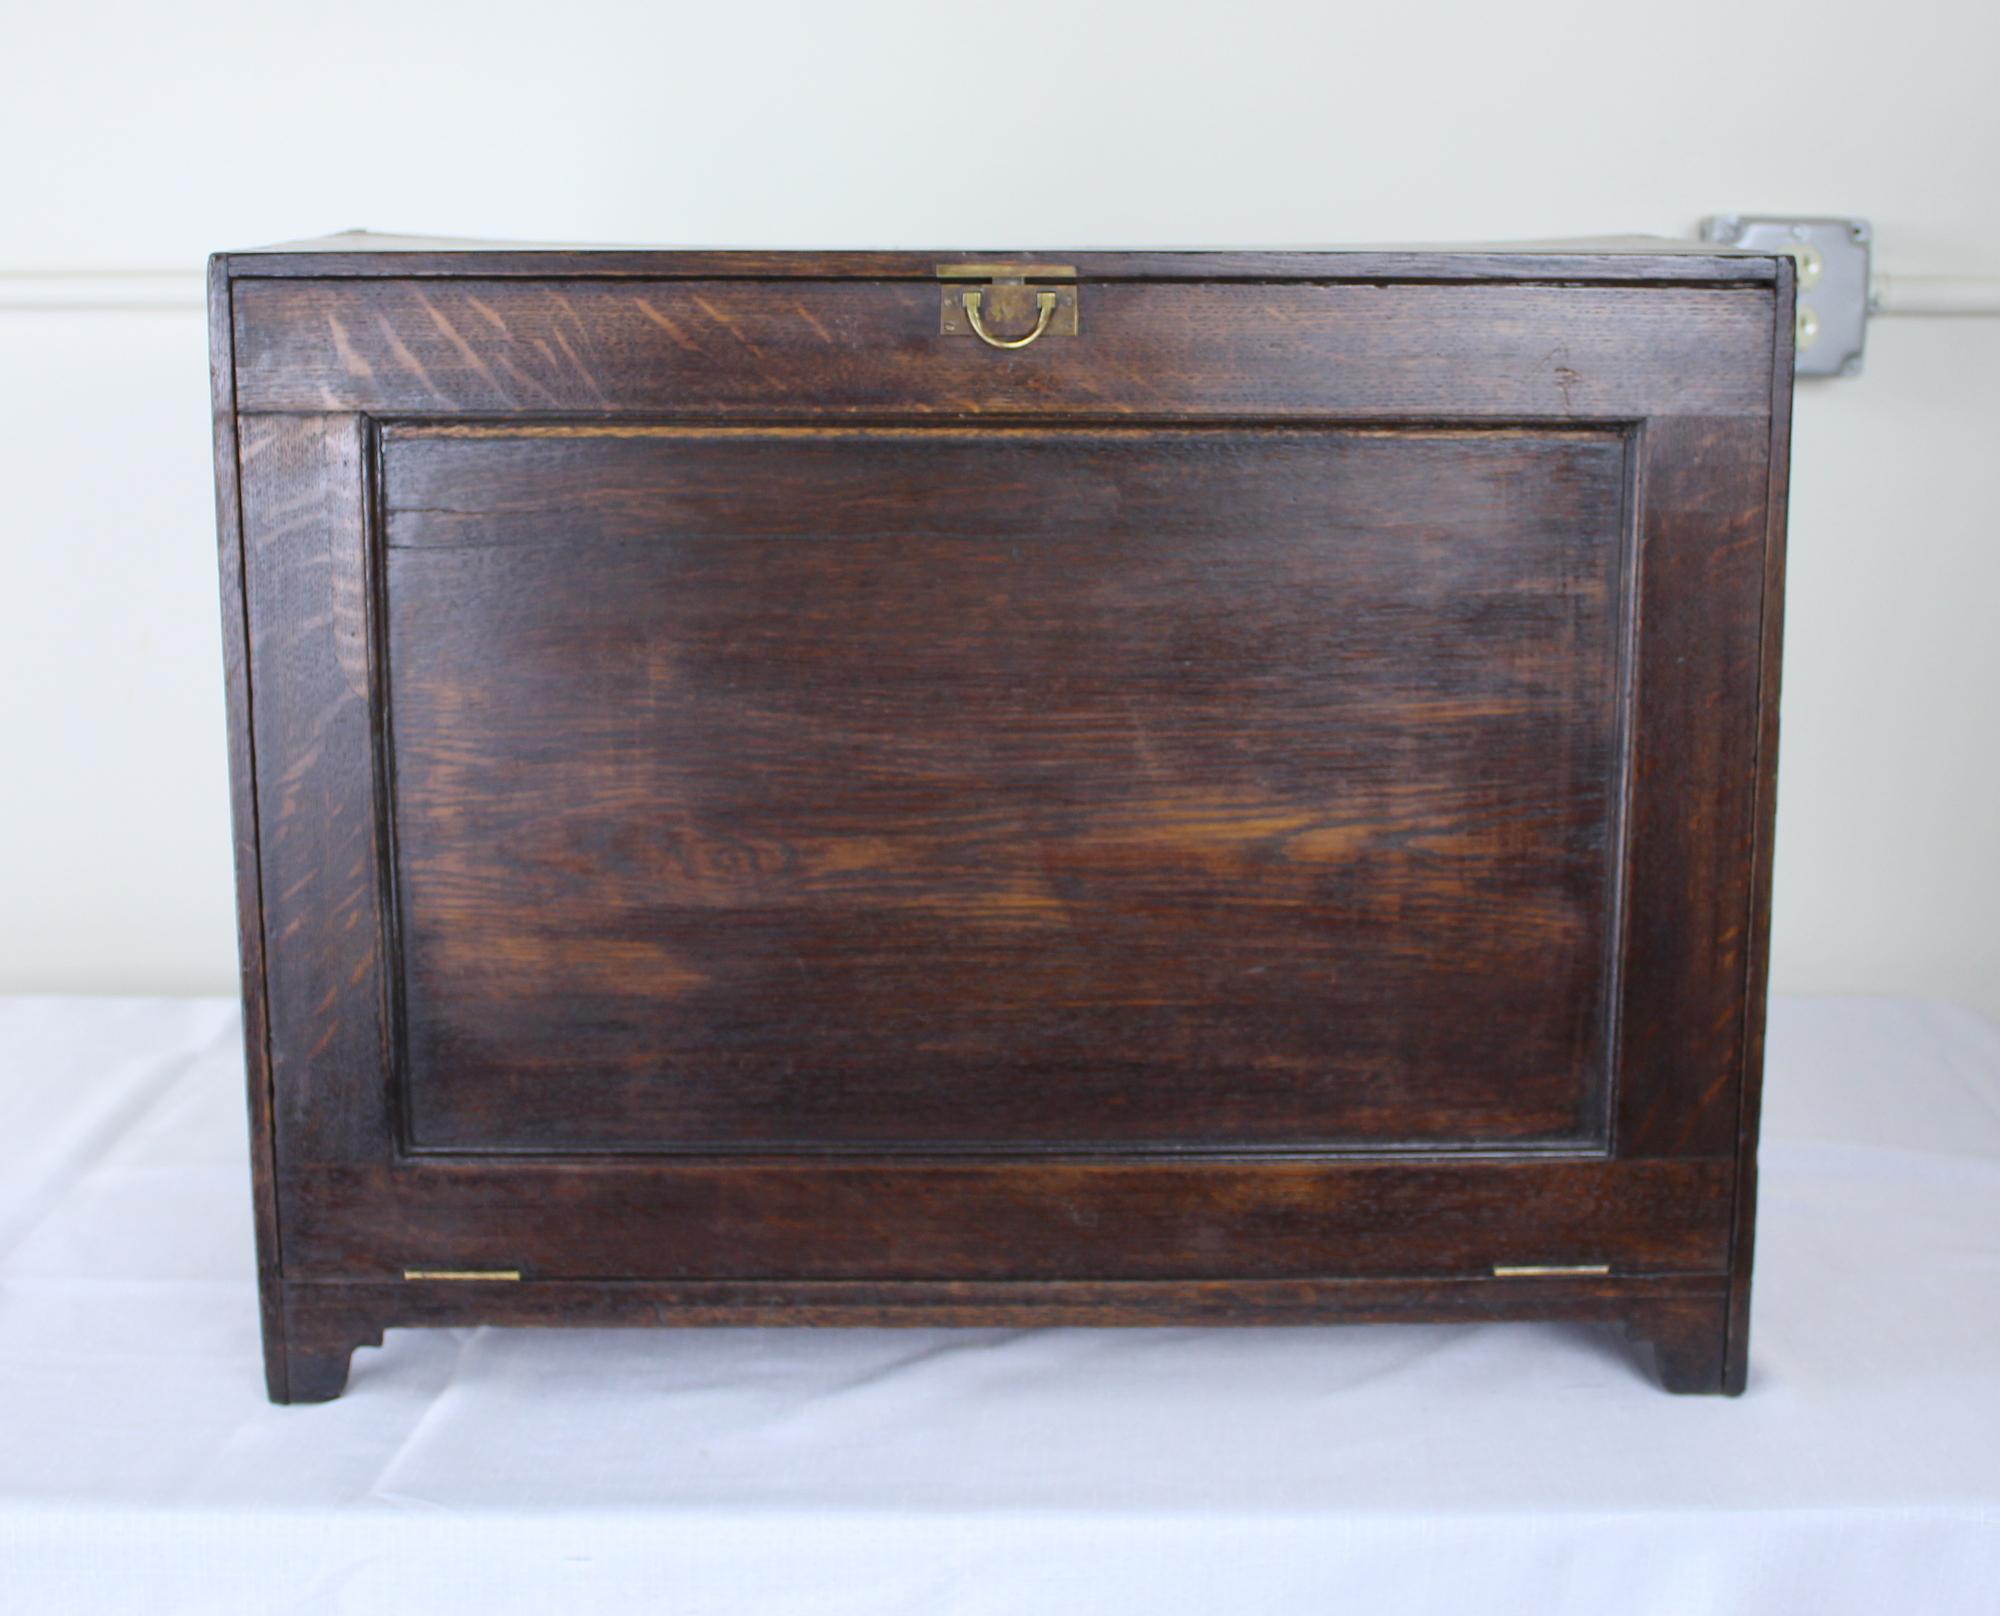 An antique oak shoe box, portable for travel. Nice brass latch and interior bars to accommodate approximately 8 pairs of shoes.